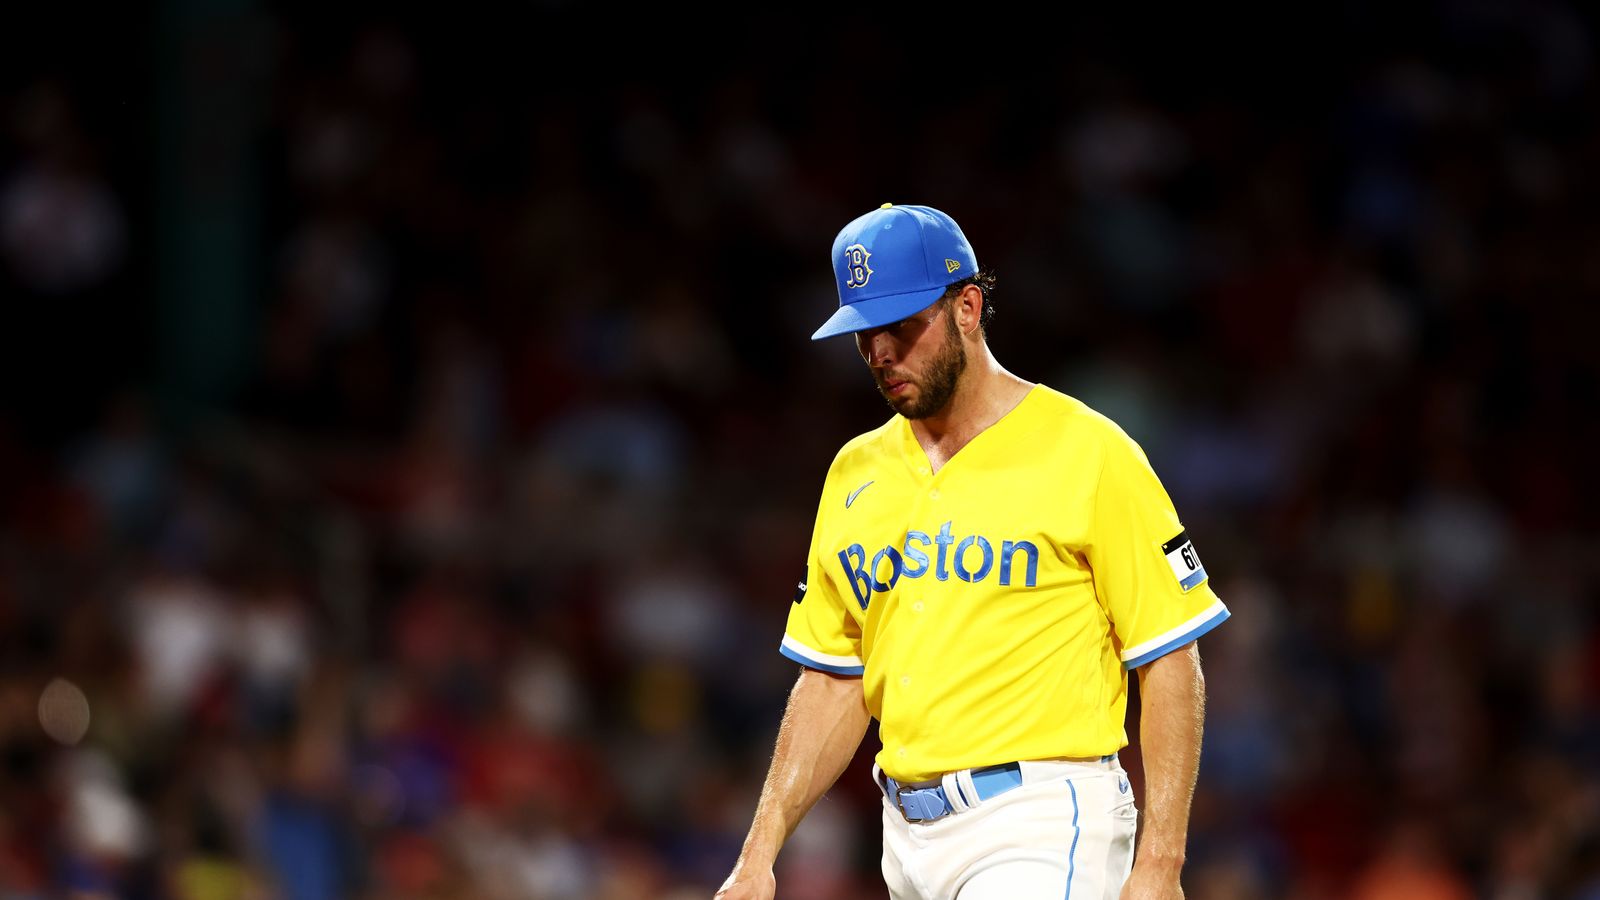 Why Are the Red Sox Wearing Yellow and Blue? New Uniforms Explained